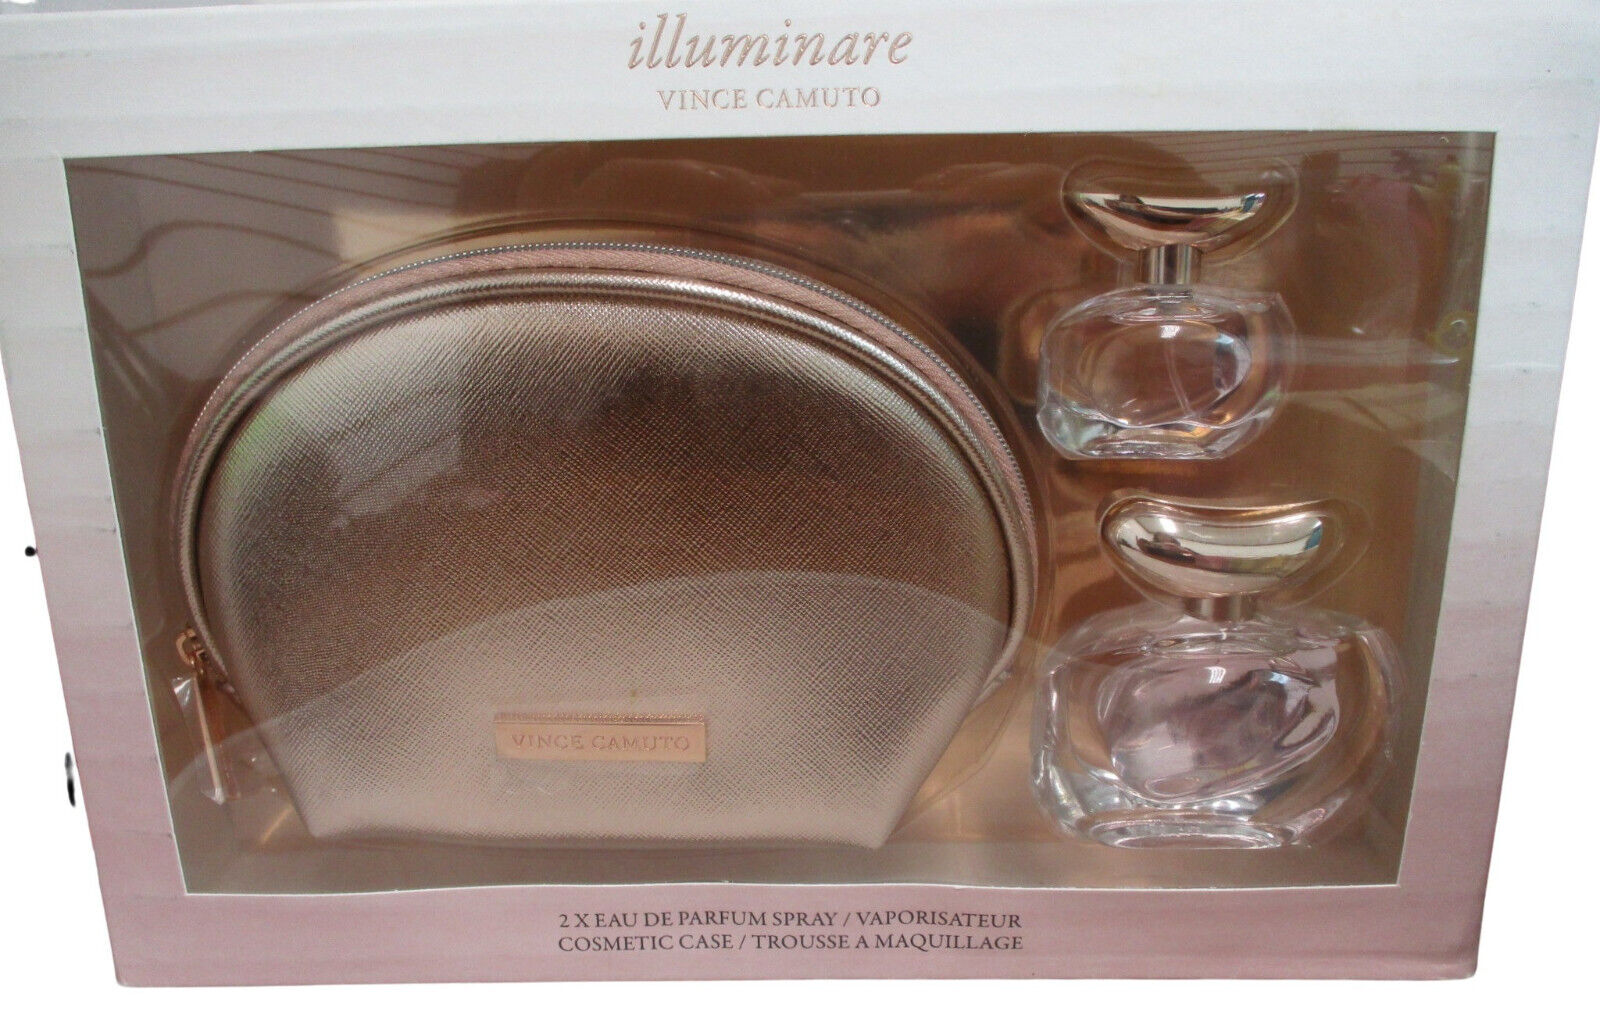 Vince Camuto Illuminare 3 Piece Gift Set with Cosmetic Bag – Hair Care &  Beauty